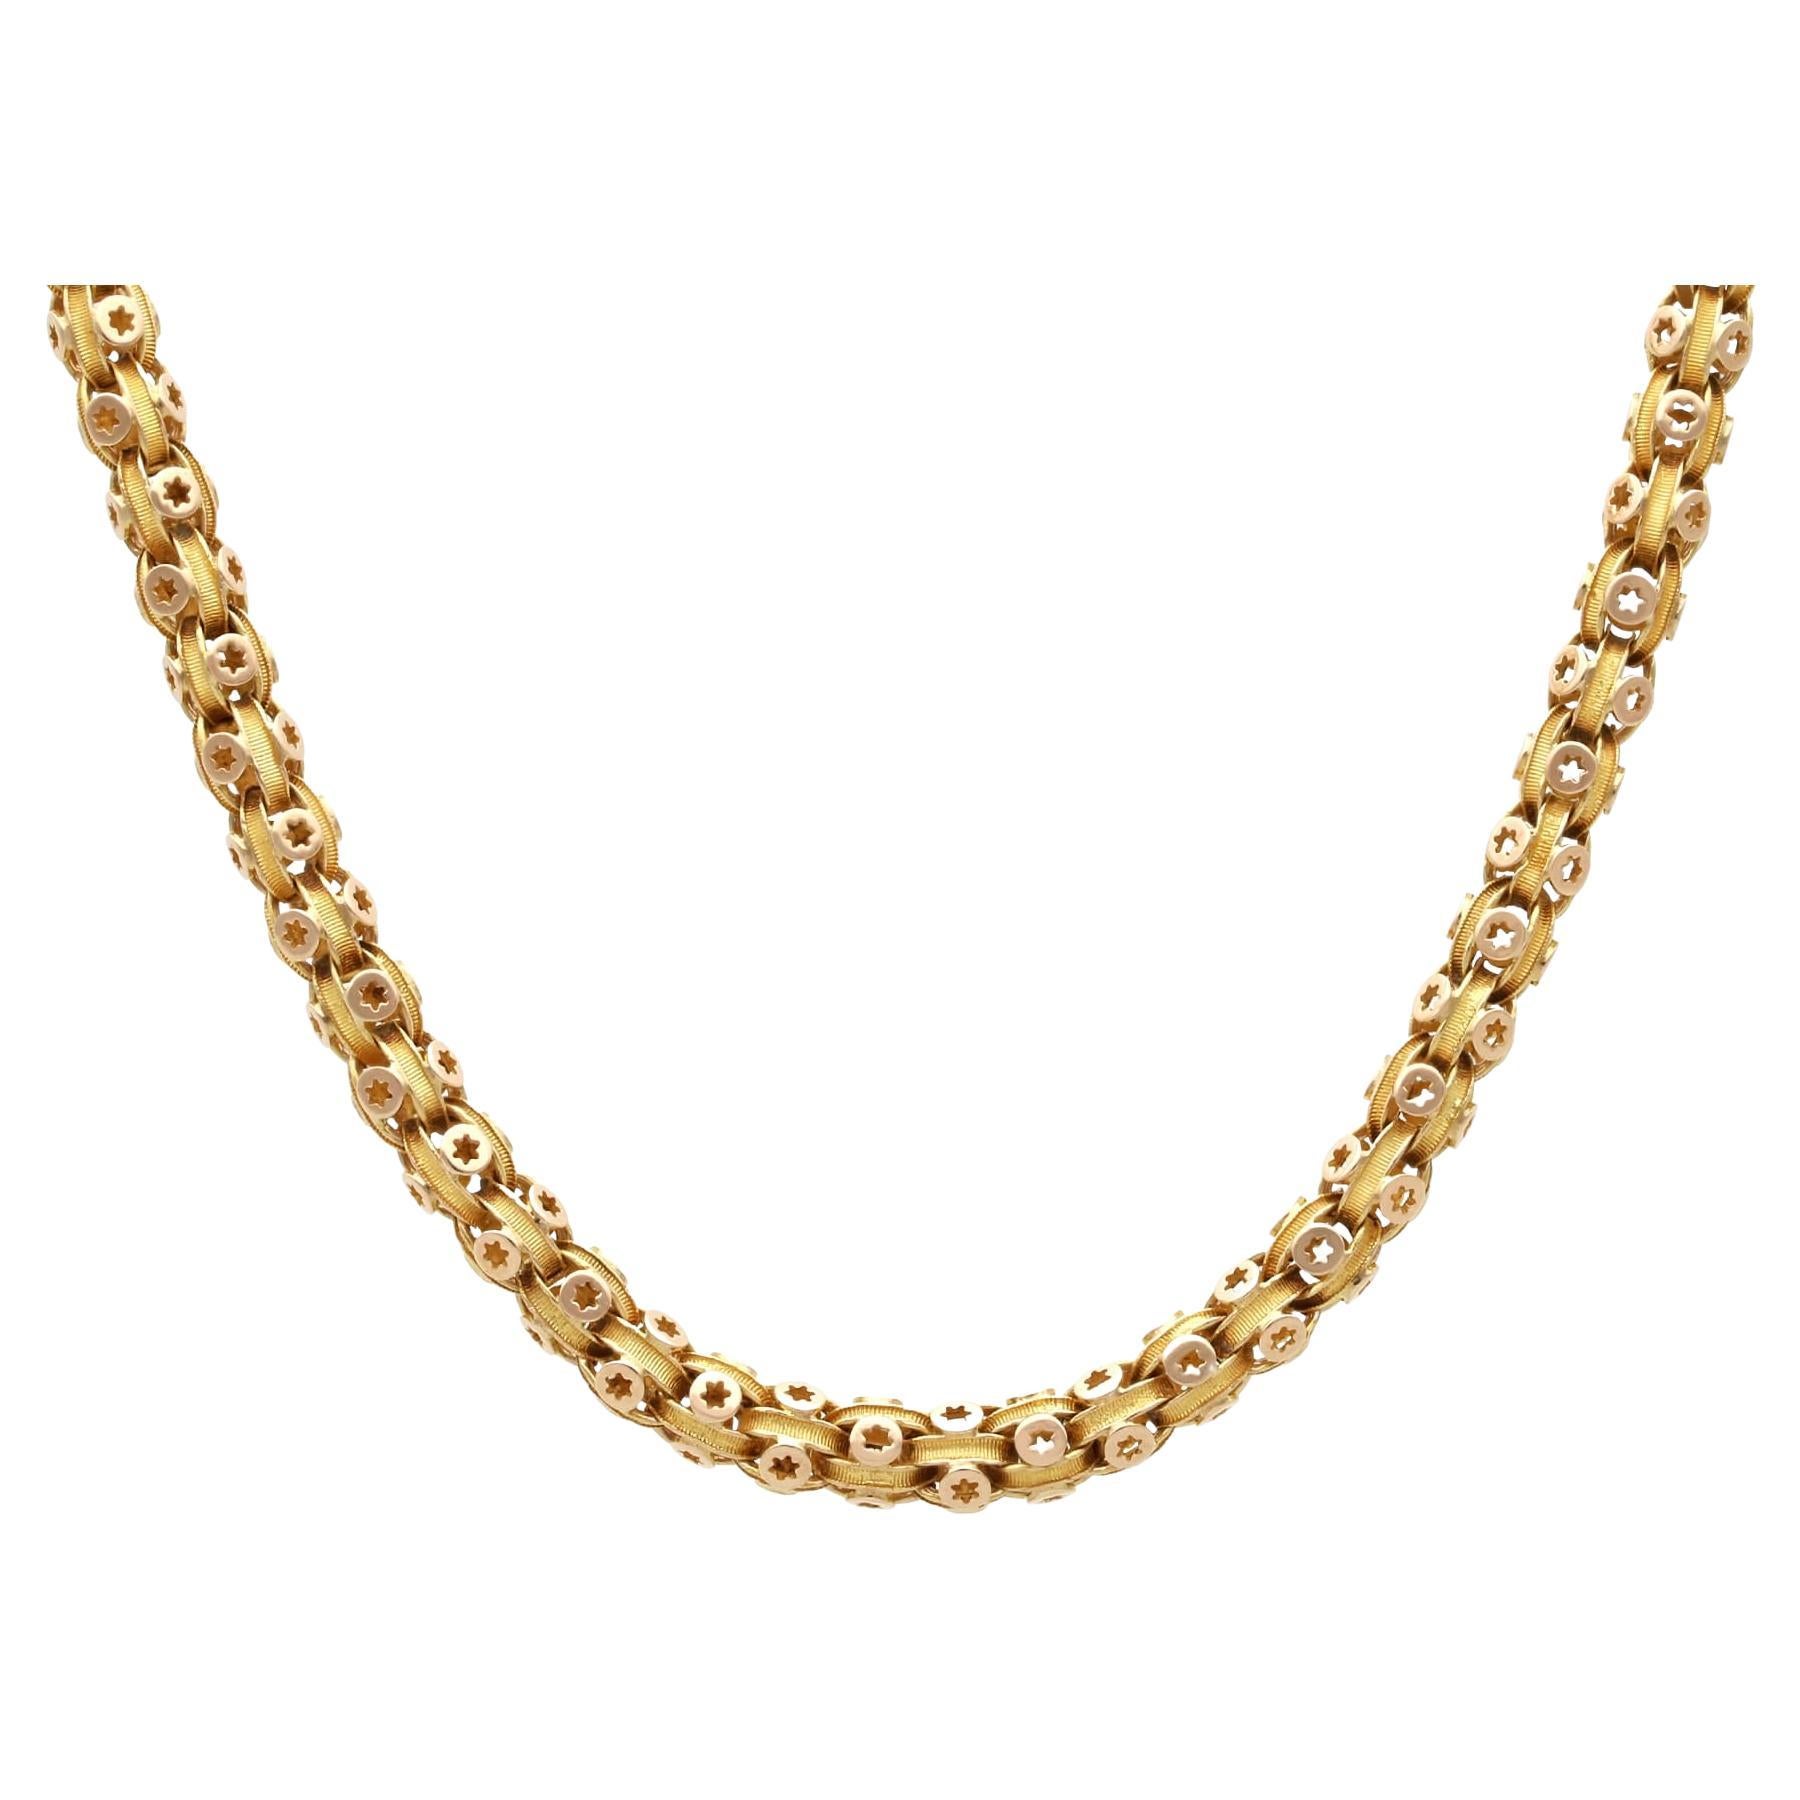 Antique 15k Yellow Gold Chain Necklace Circa 1870 For Sale